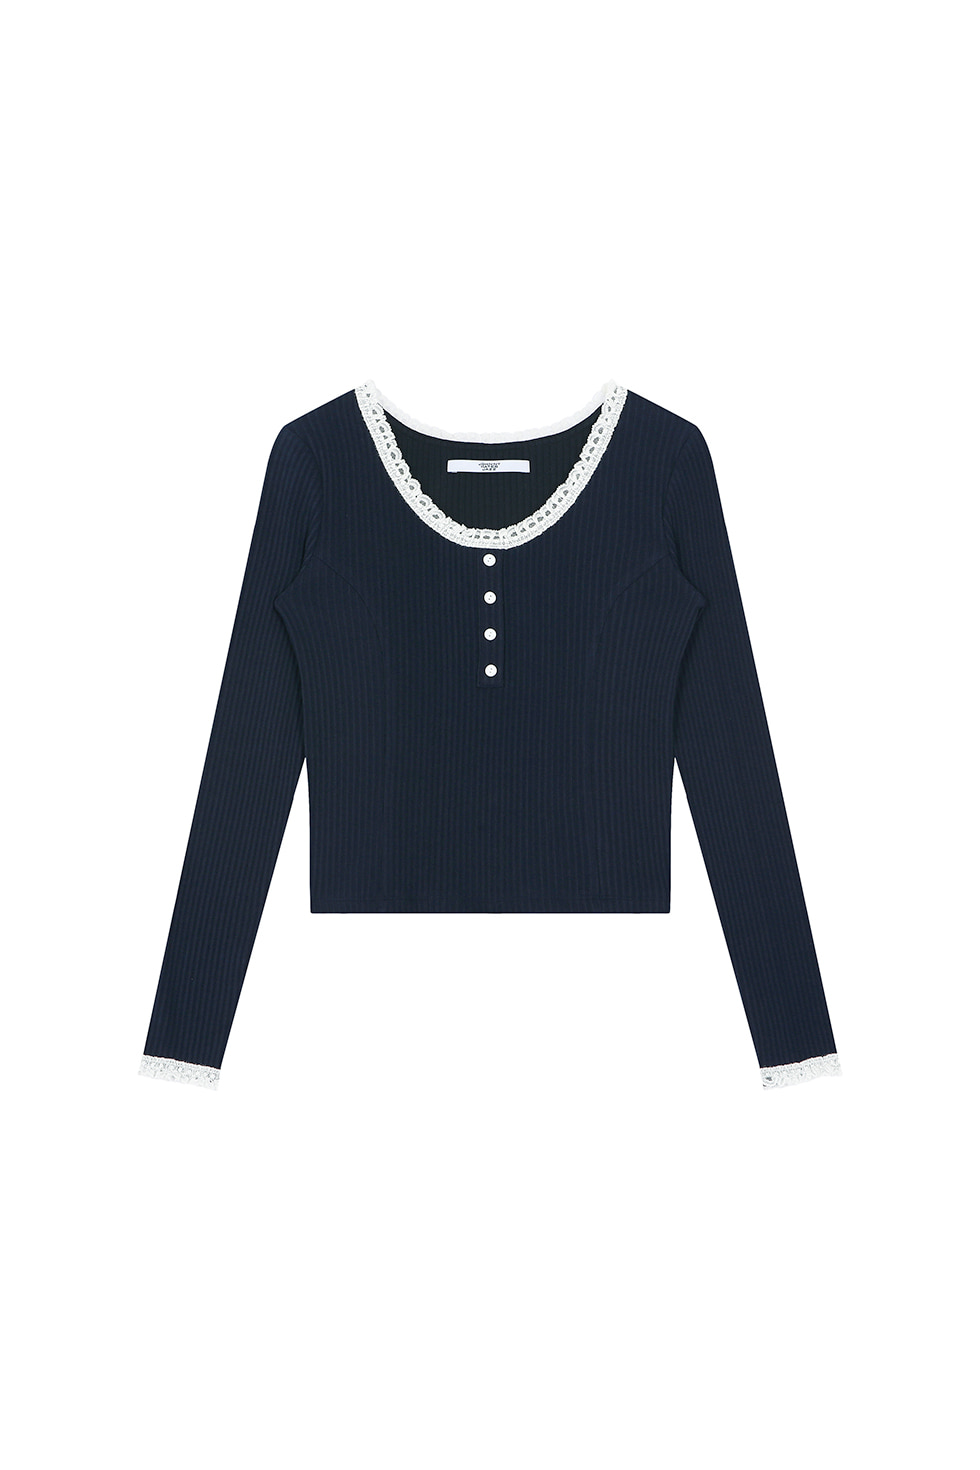 LACE NECK LONG SLEEVES - NAVY